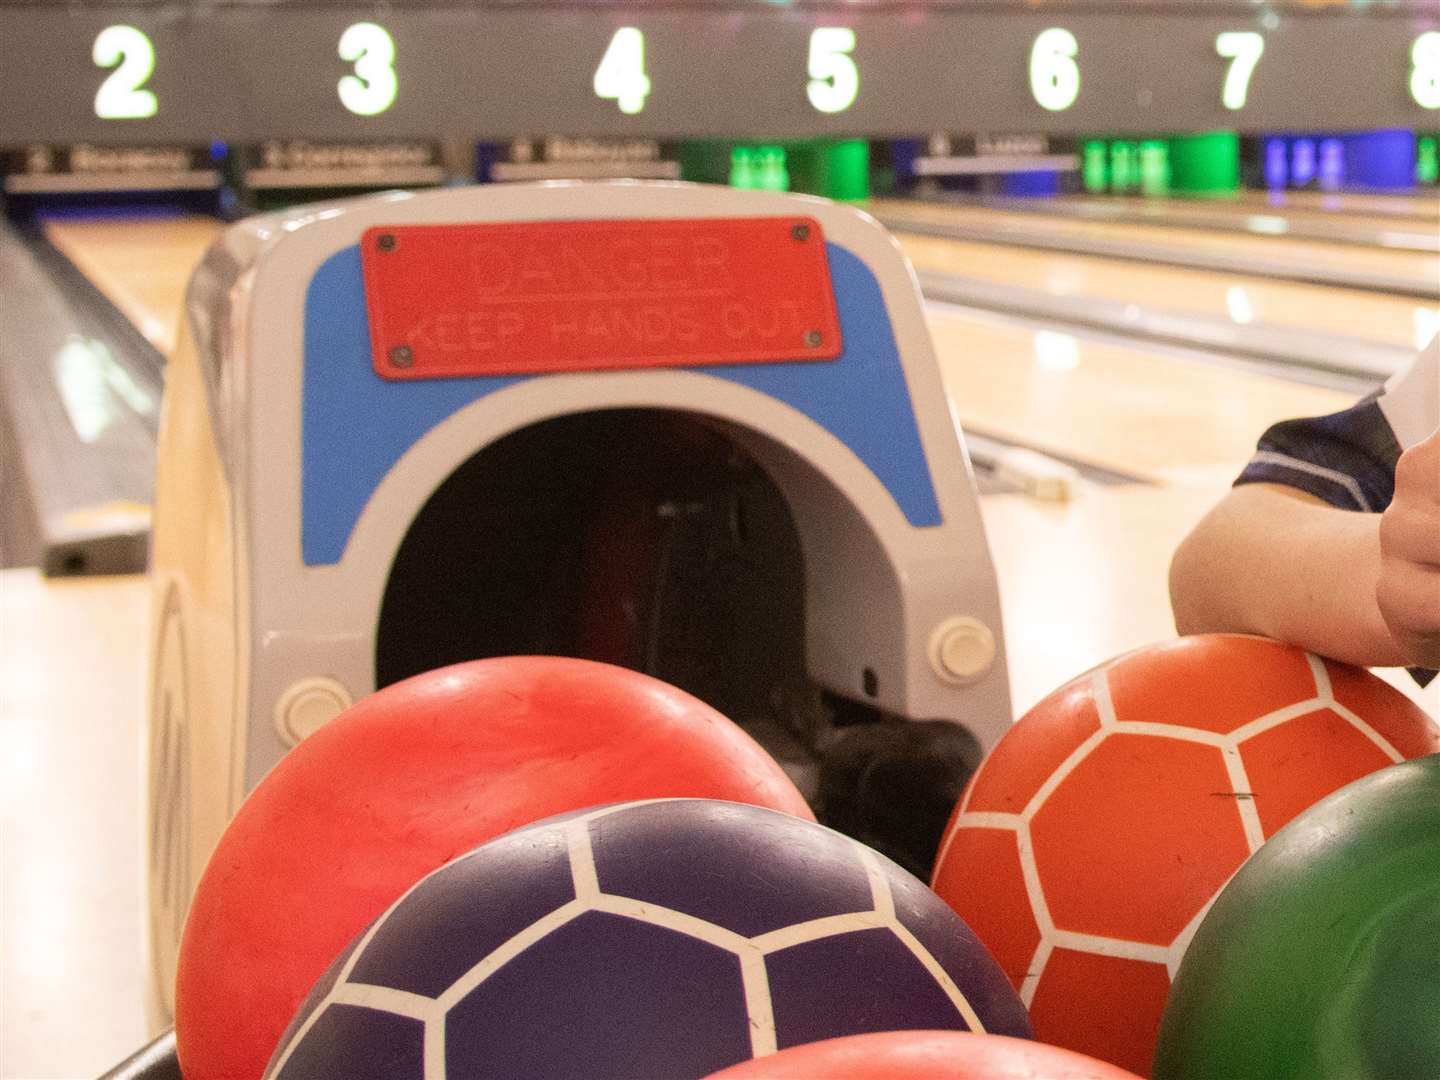 The idea of a new bowling alley has prompted a mix of reactions.